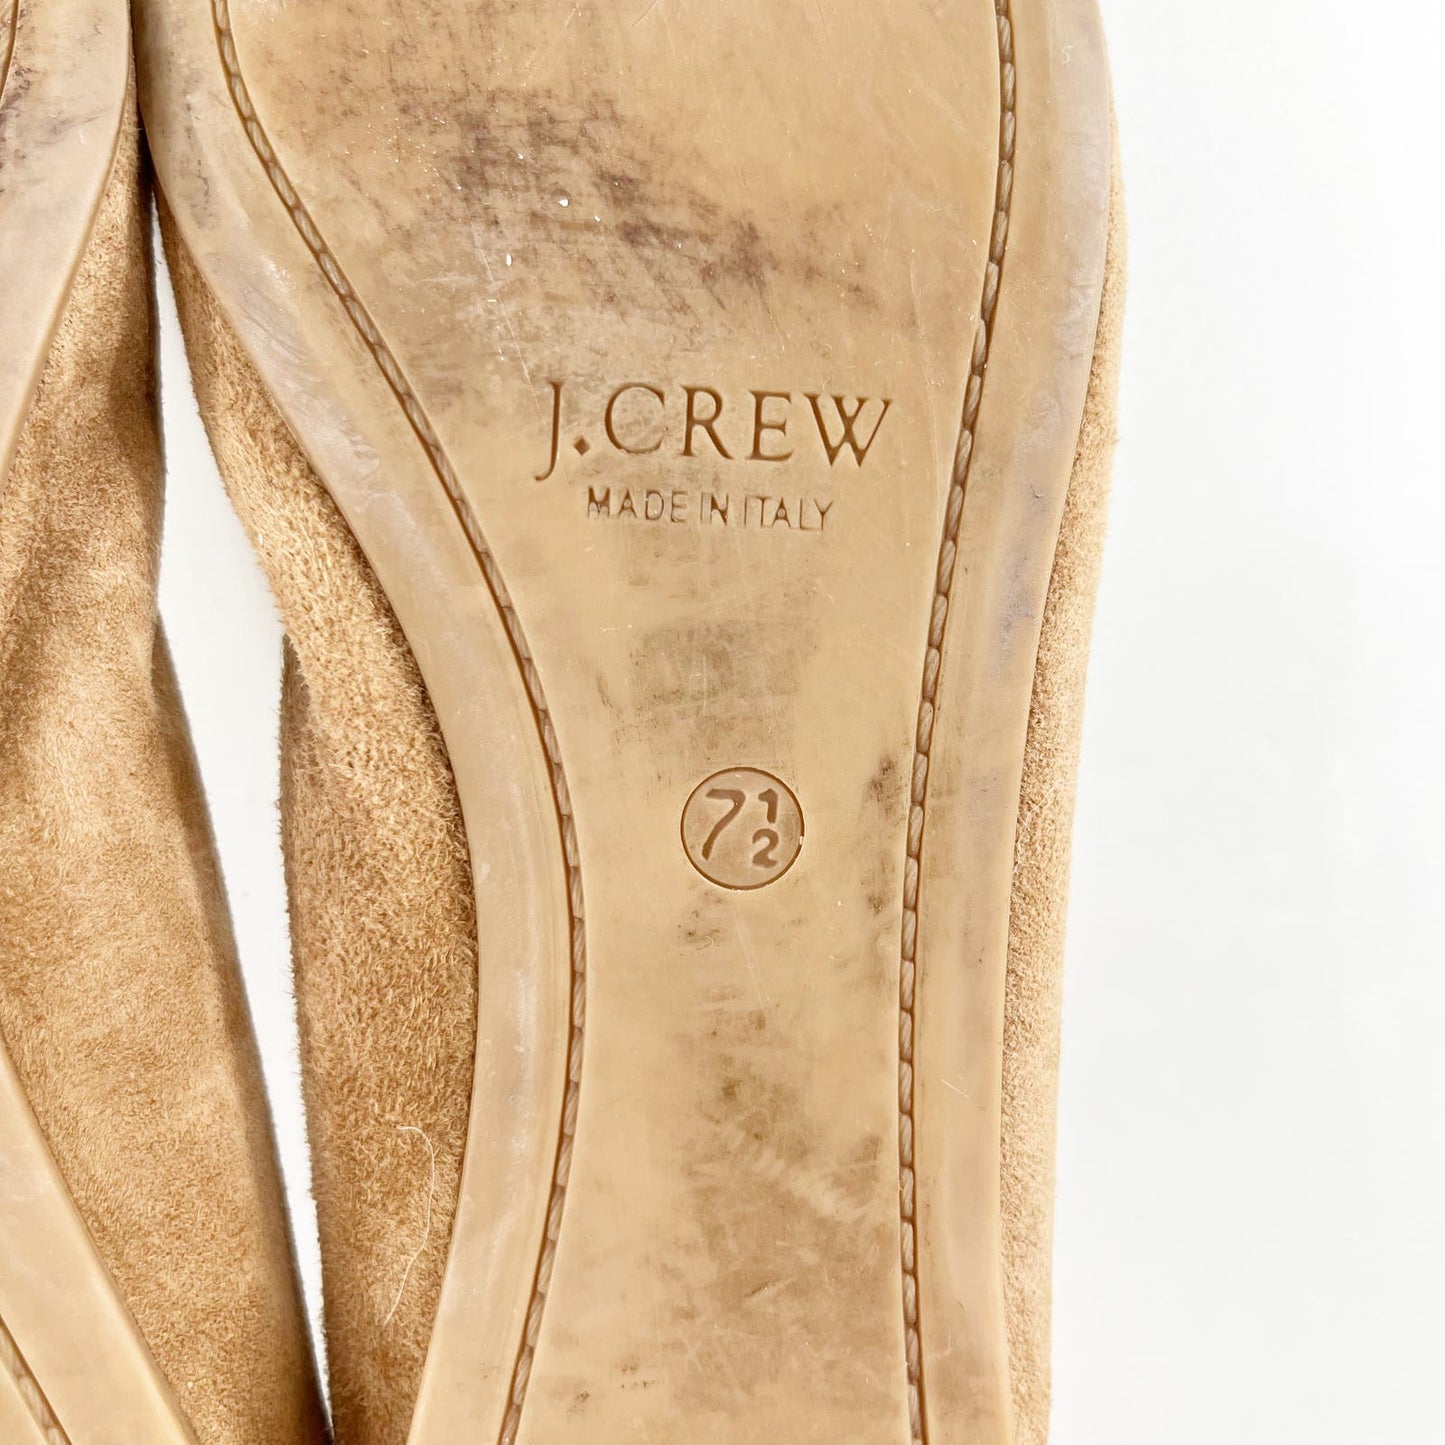 J. Crew Cece Studded Suede Leather Ballet Flats Brown 7.5